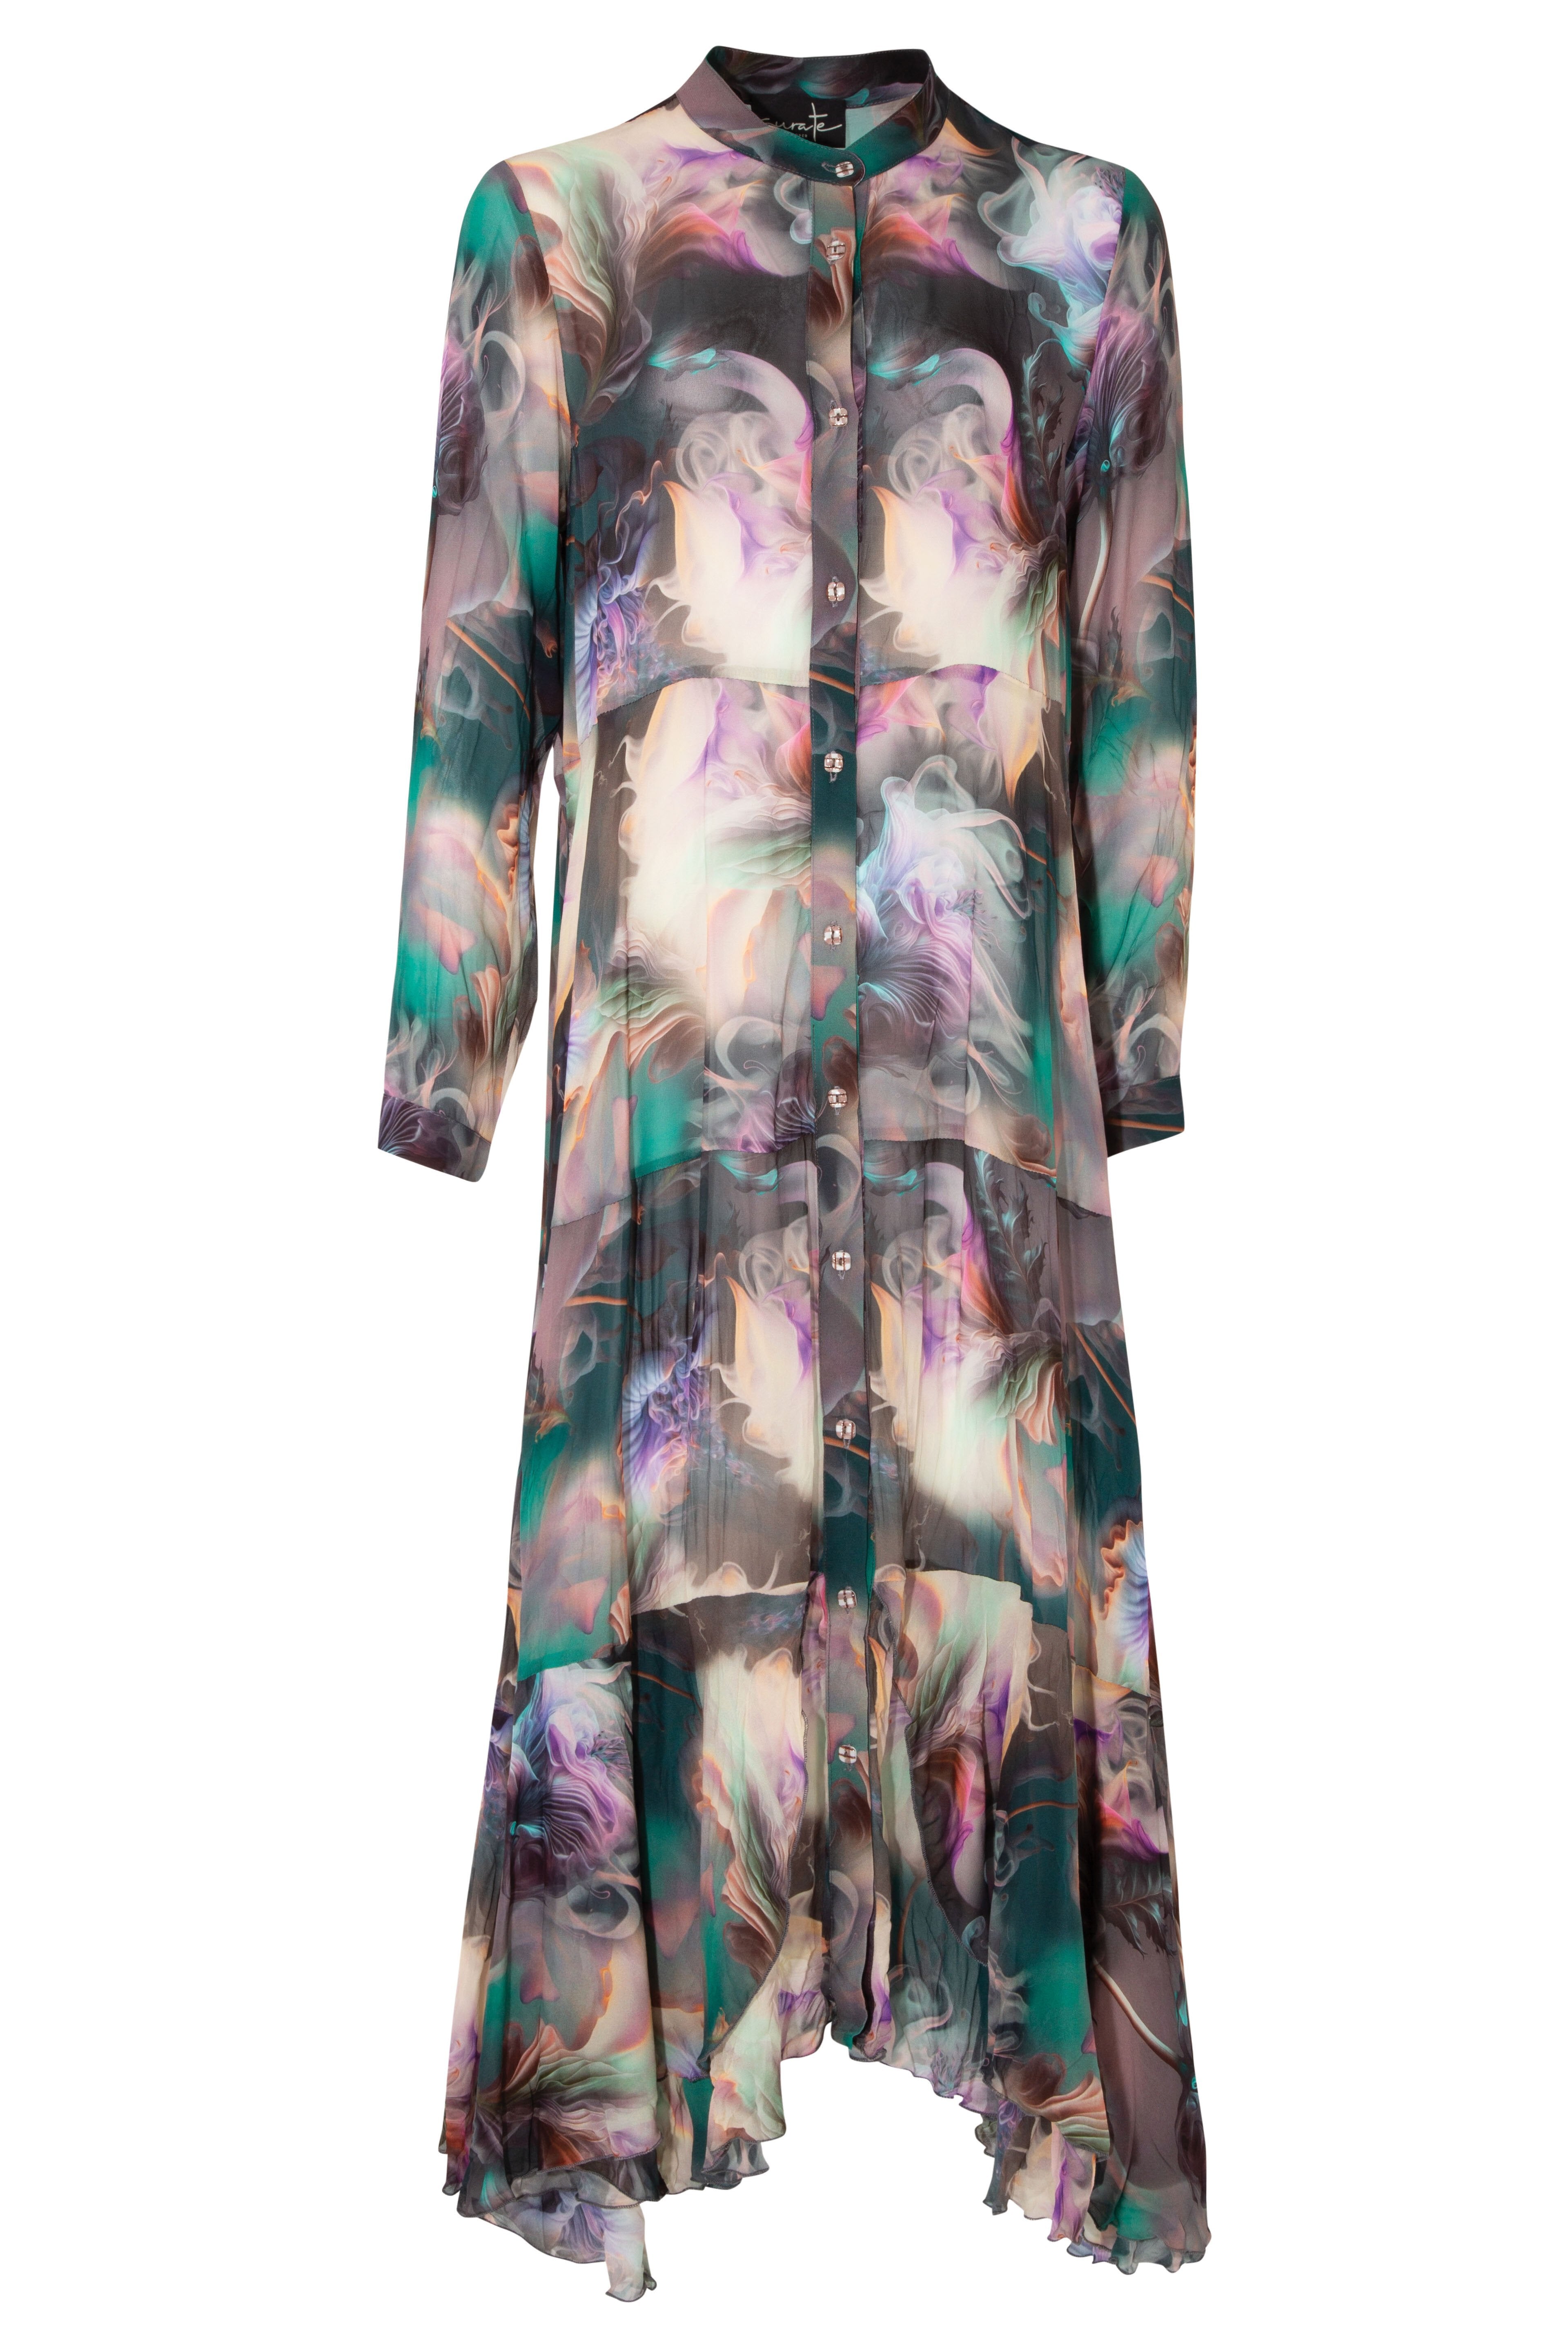 Curate By Trelise Cooper - IN FULL SWING DRESS - WATERLILY